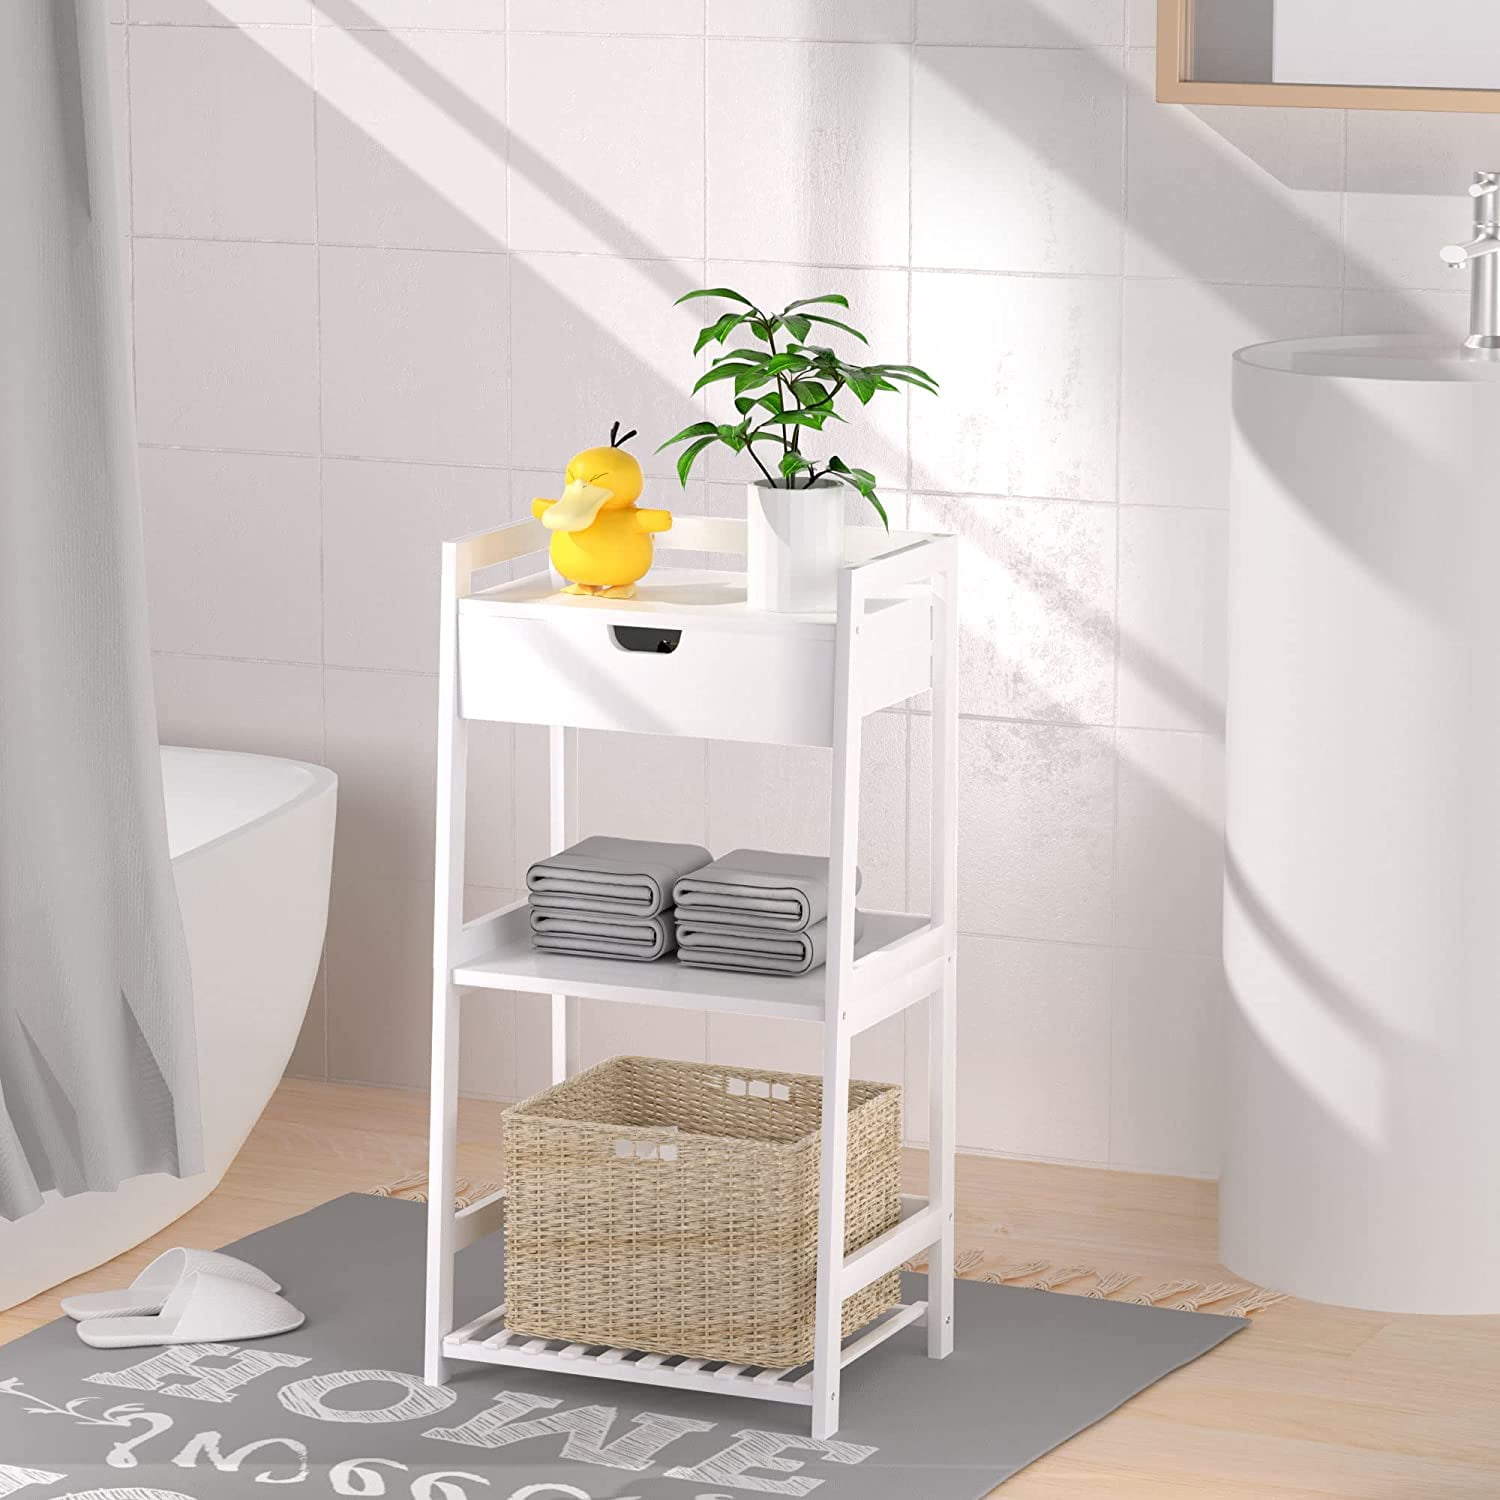 3 Tiers White Freestanding Storage Bathroom Shelves with Handles